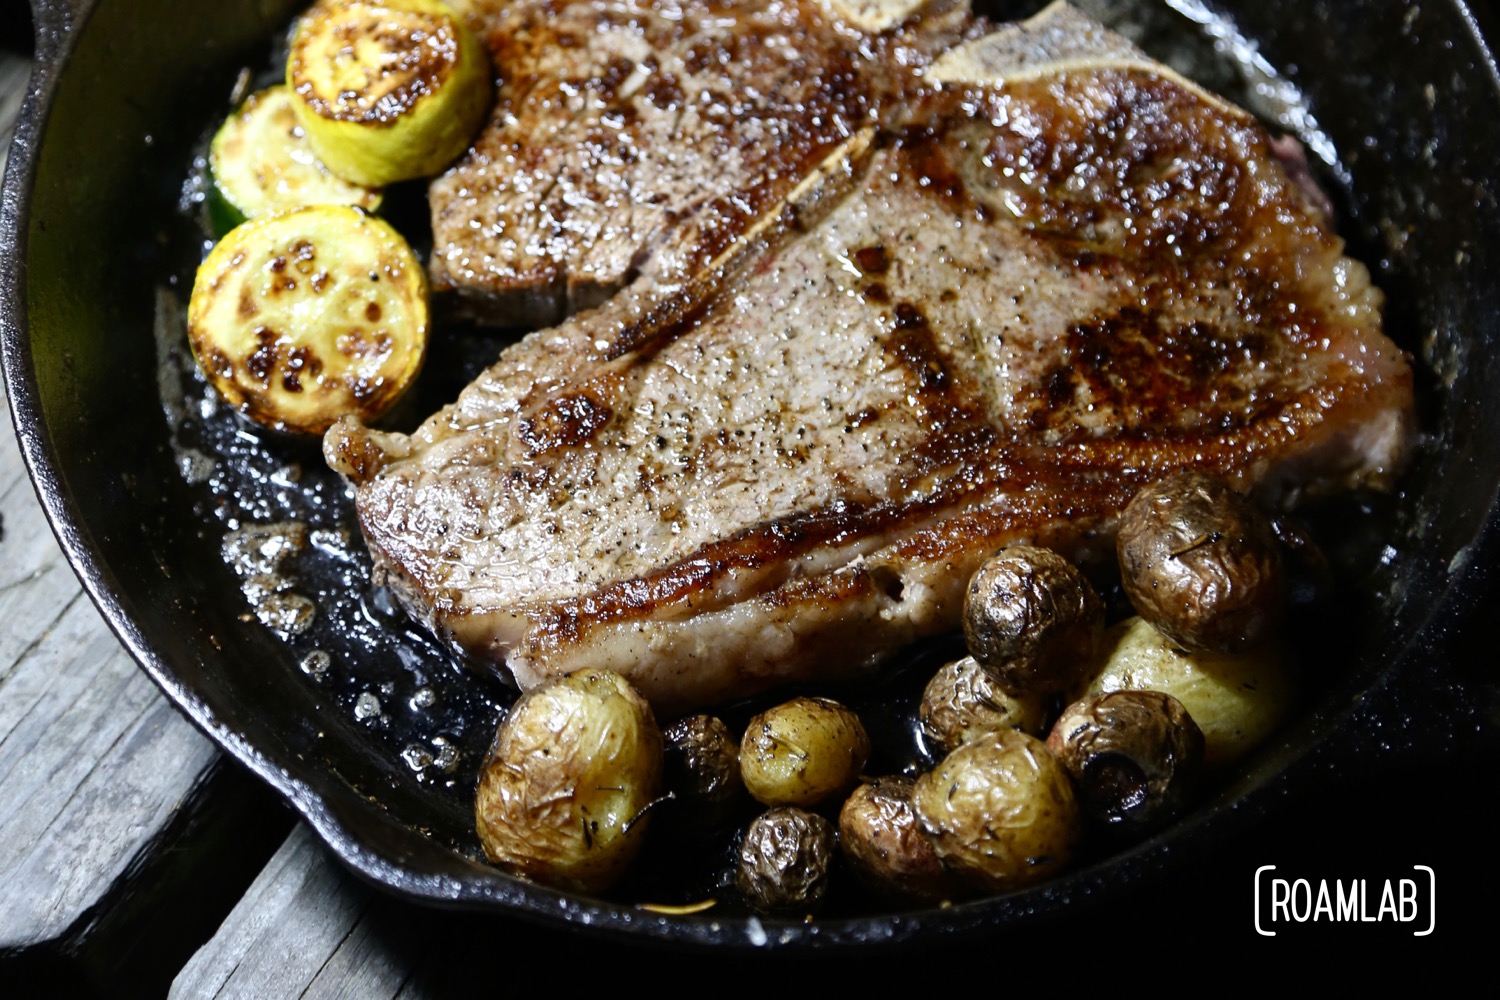 Porterhouse ready to eat with yellow squash and roasted potatoes.